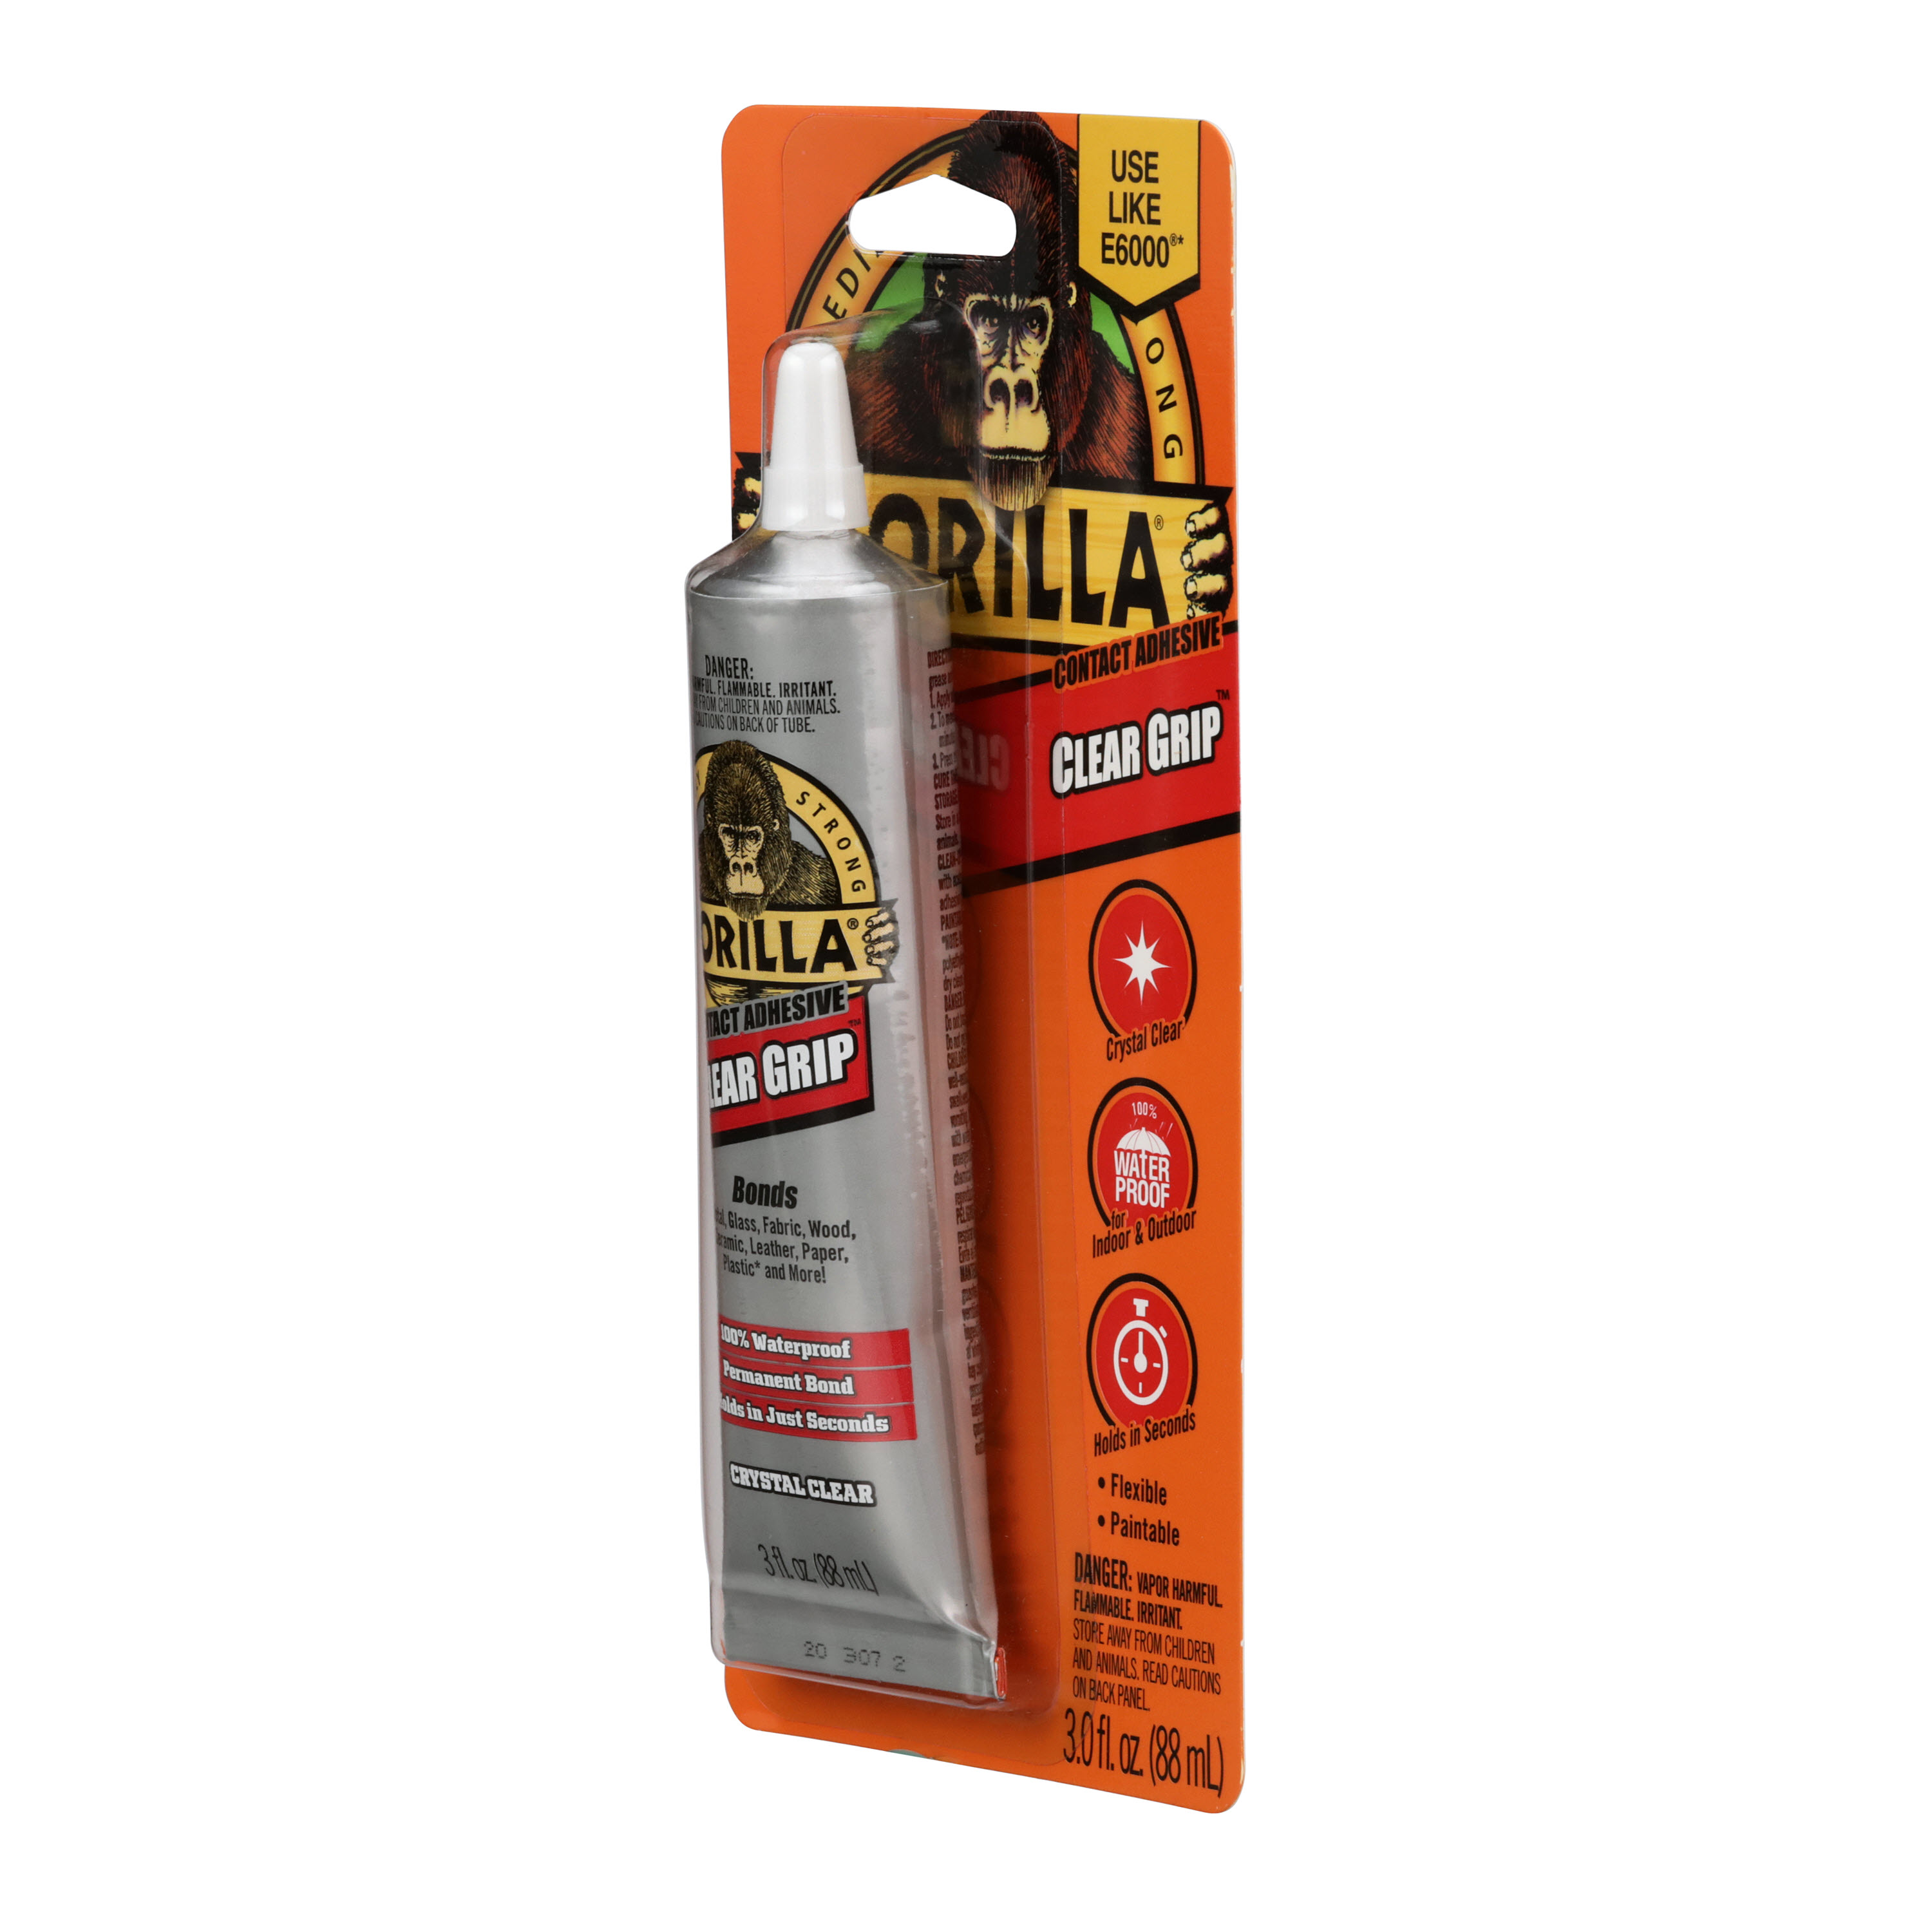 Gorilla Clear Grip Contact Adhesive, Waterproof, 3 ounce, Clear, (Pack of 3)